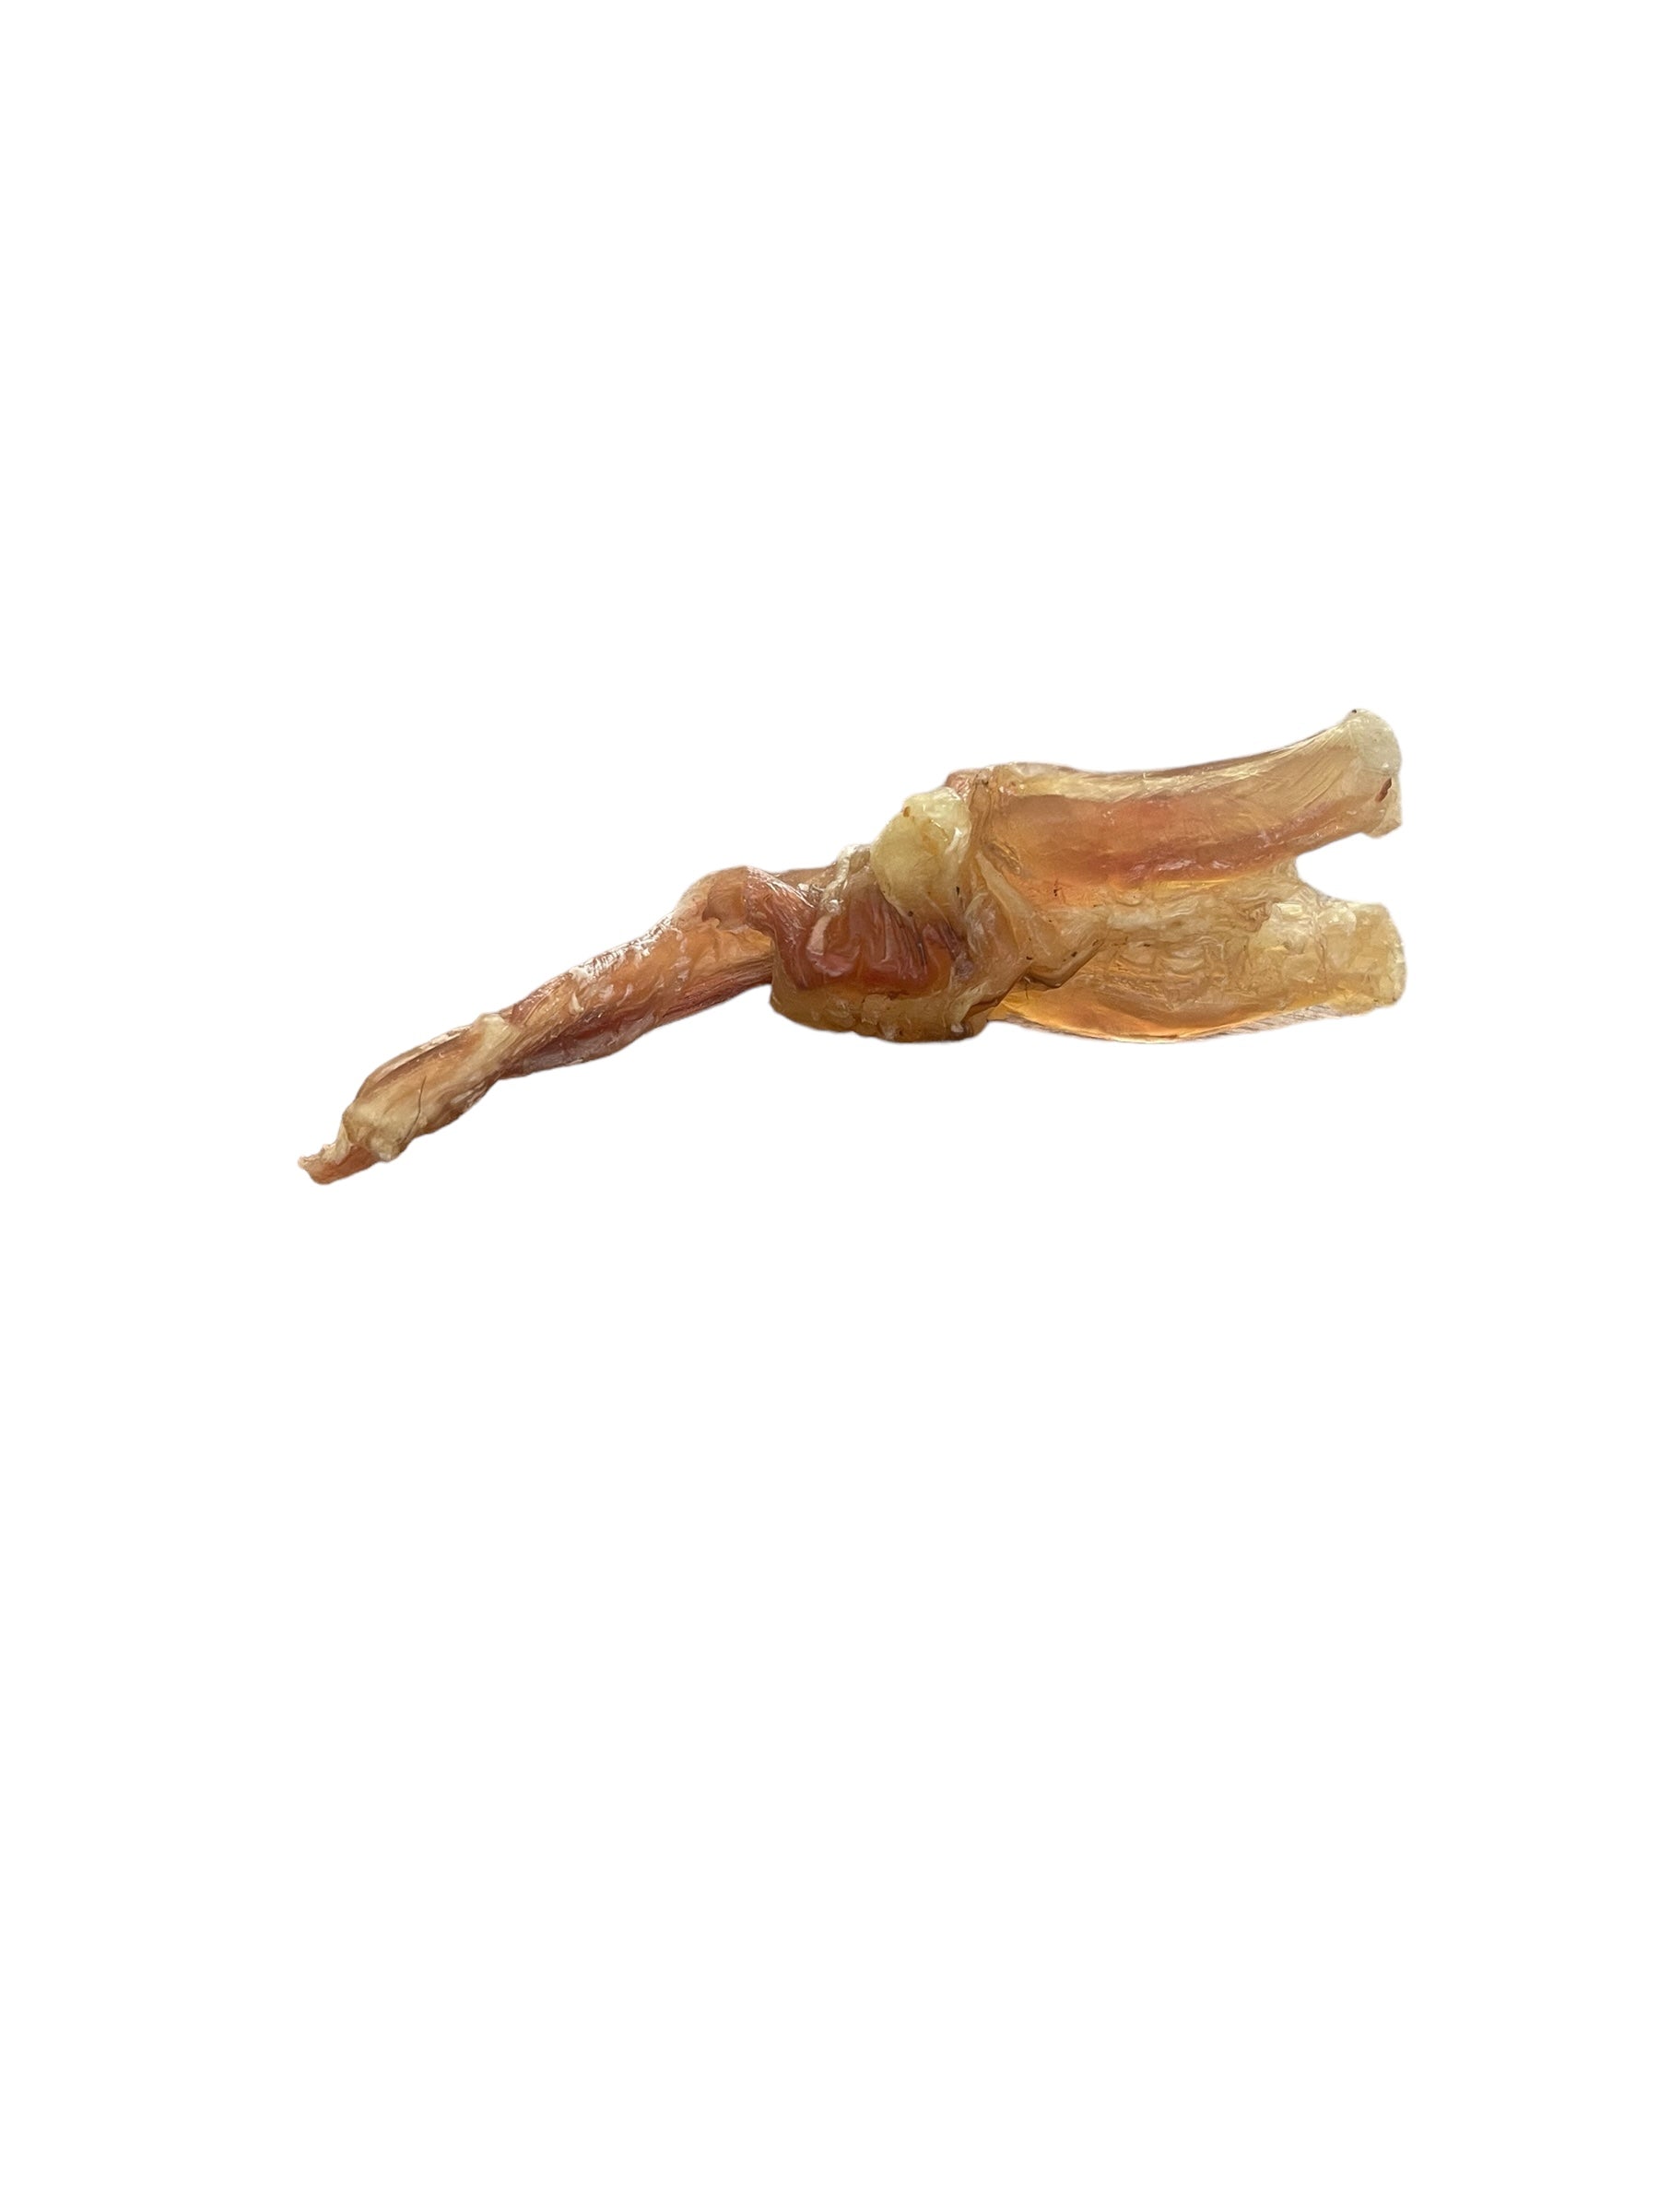 Dehydrated Beef Tendon